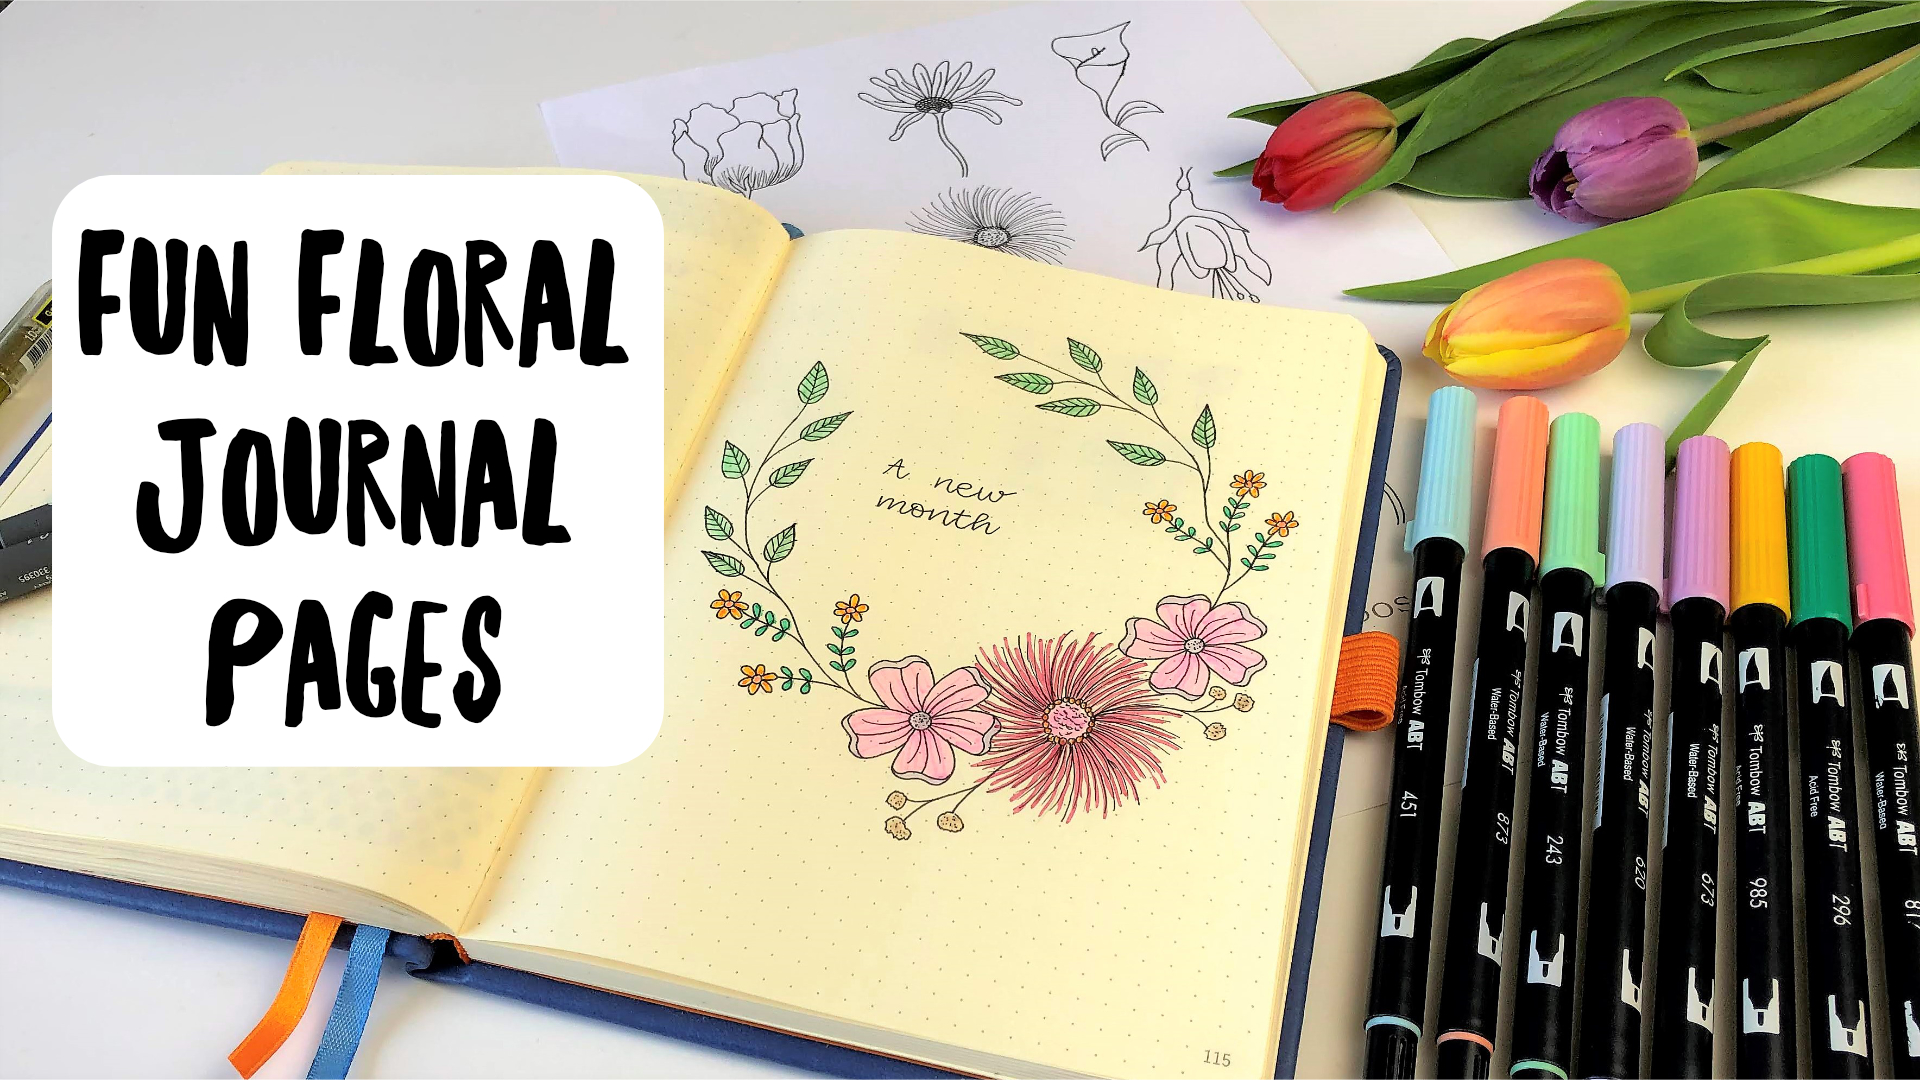 Fun Floral Journal Pages Course